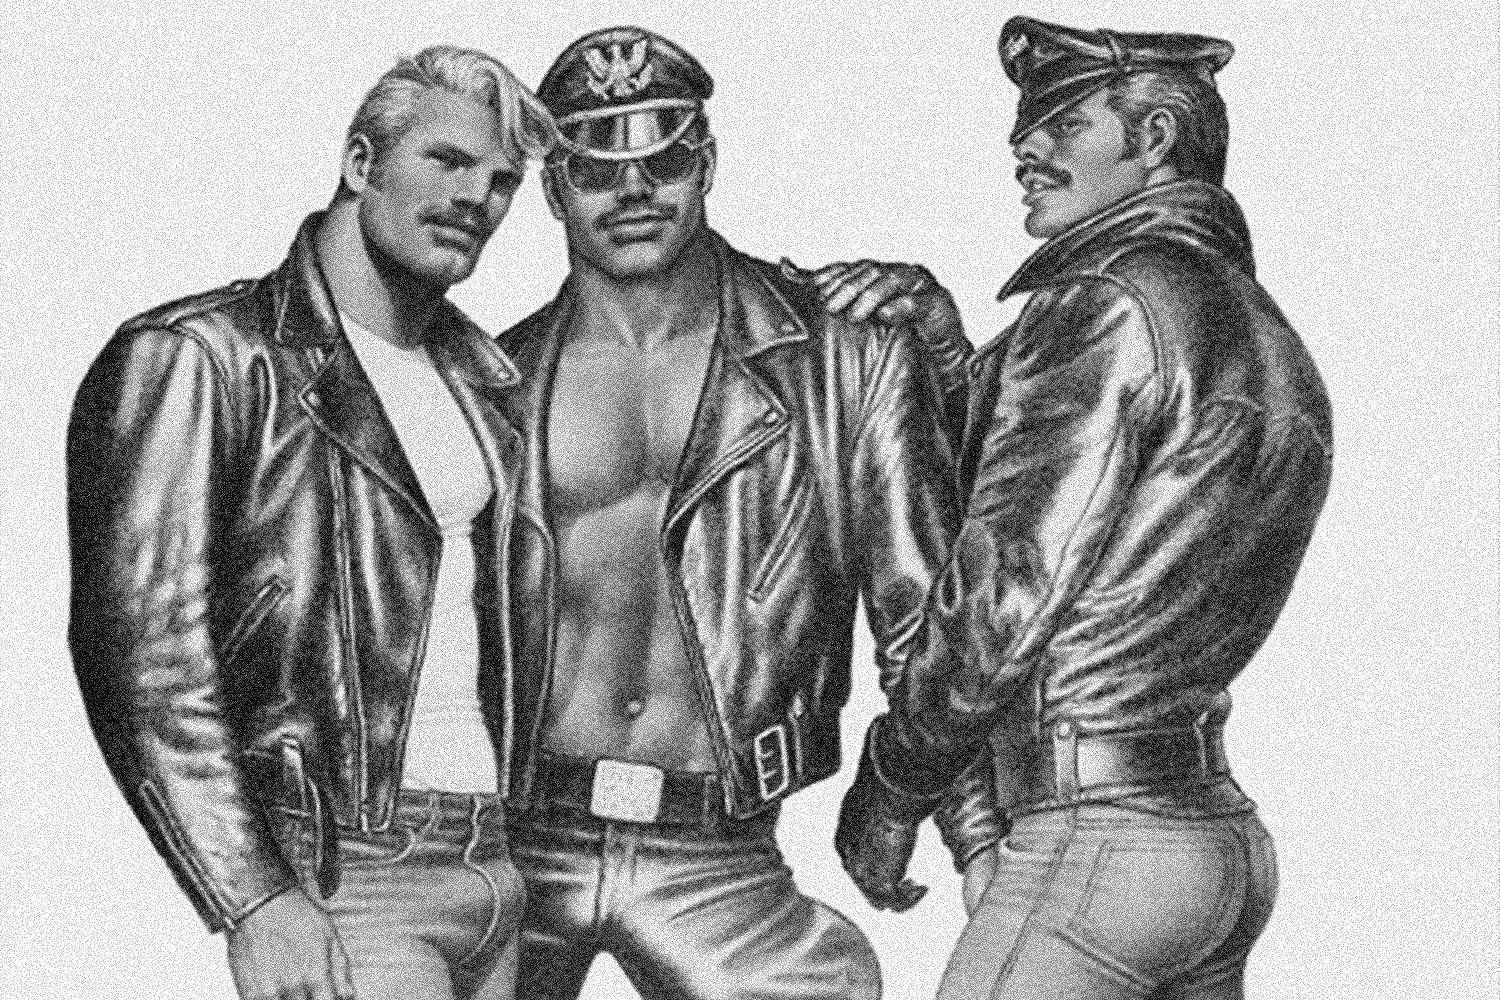 Looking Back at 100 Years of Tom of Finland's Legacy InsideHook